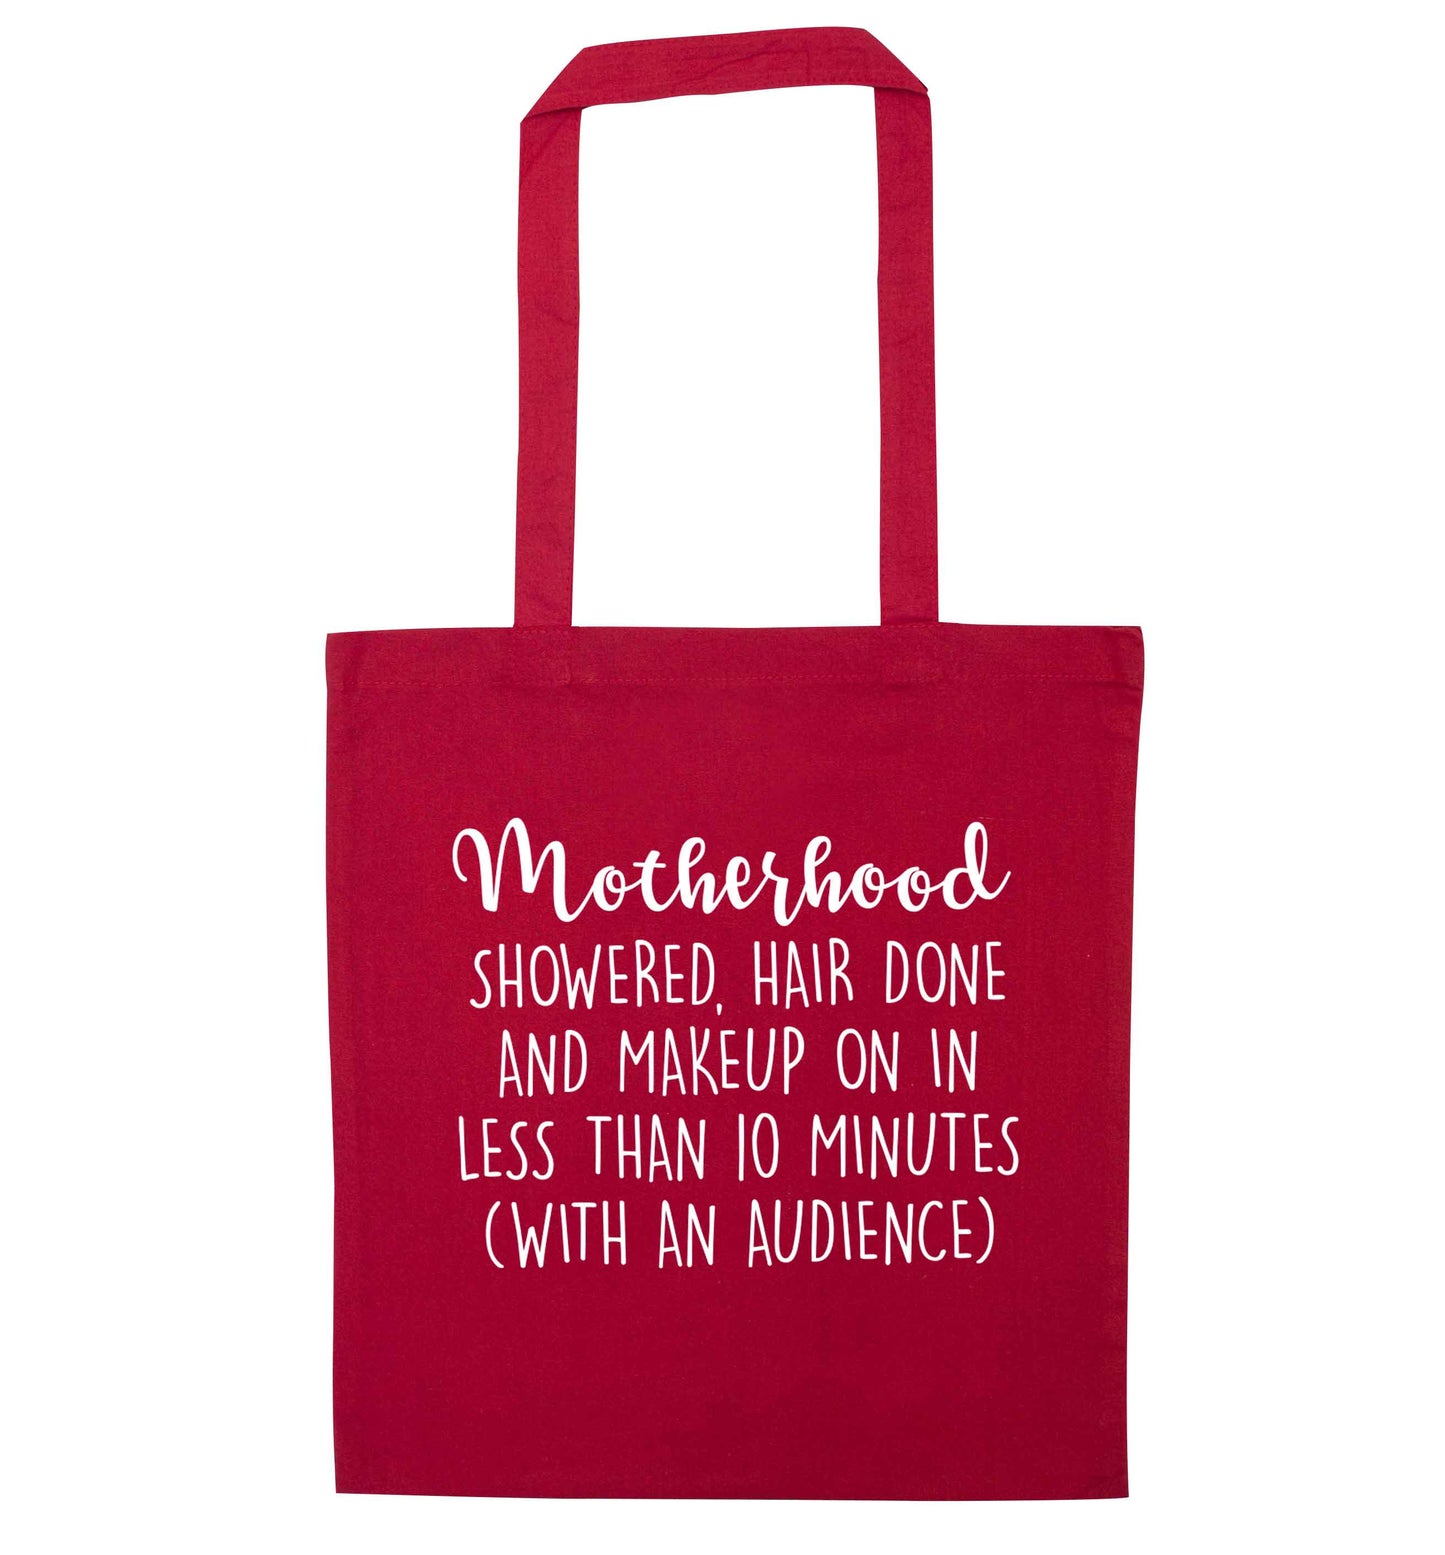 Motherhood, showered, hair done and makeup on red tote bag